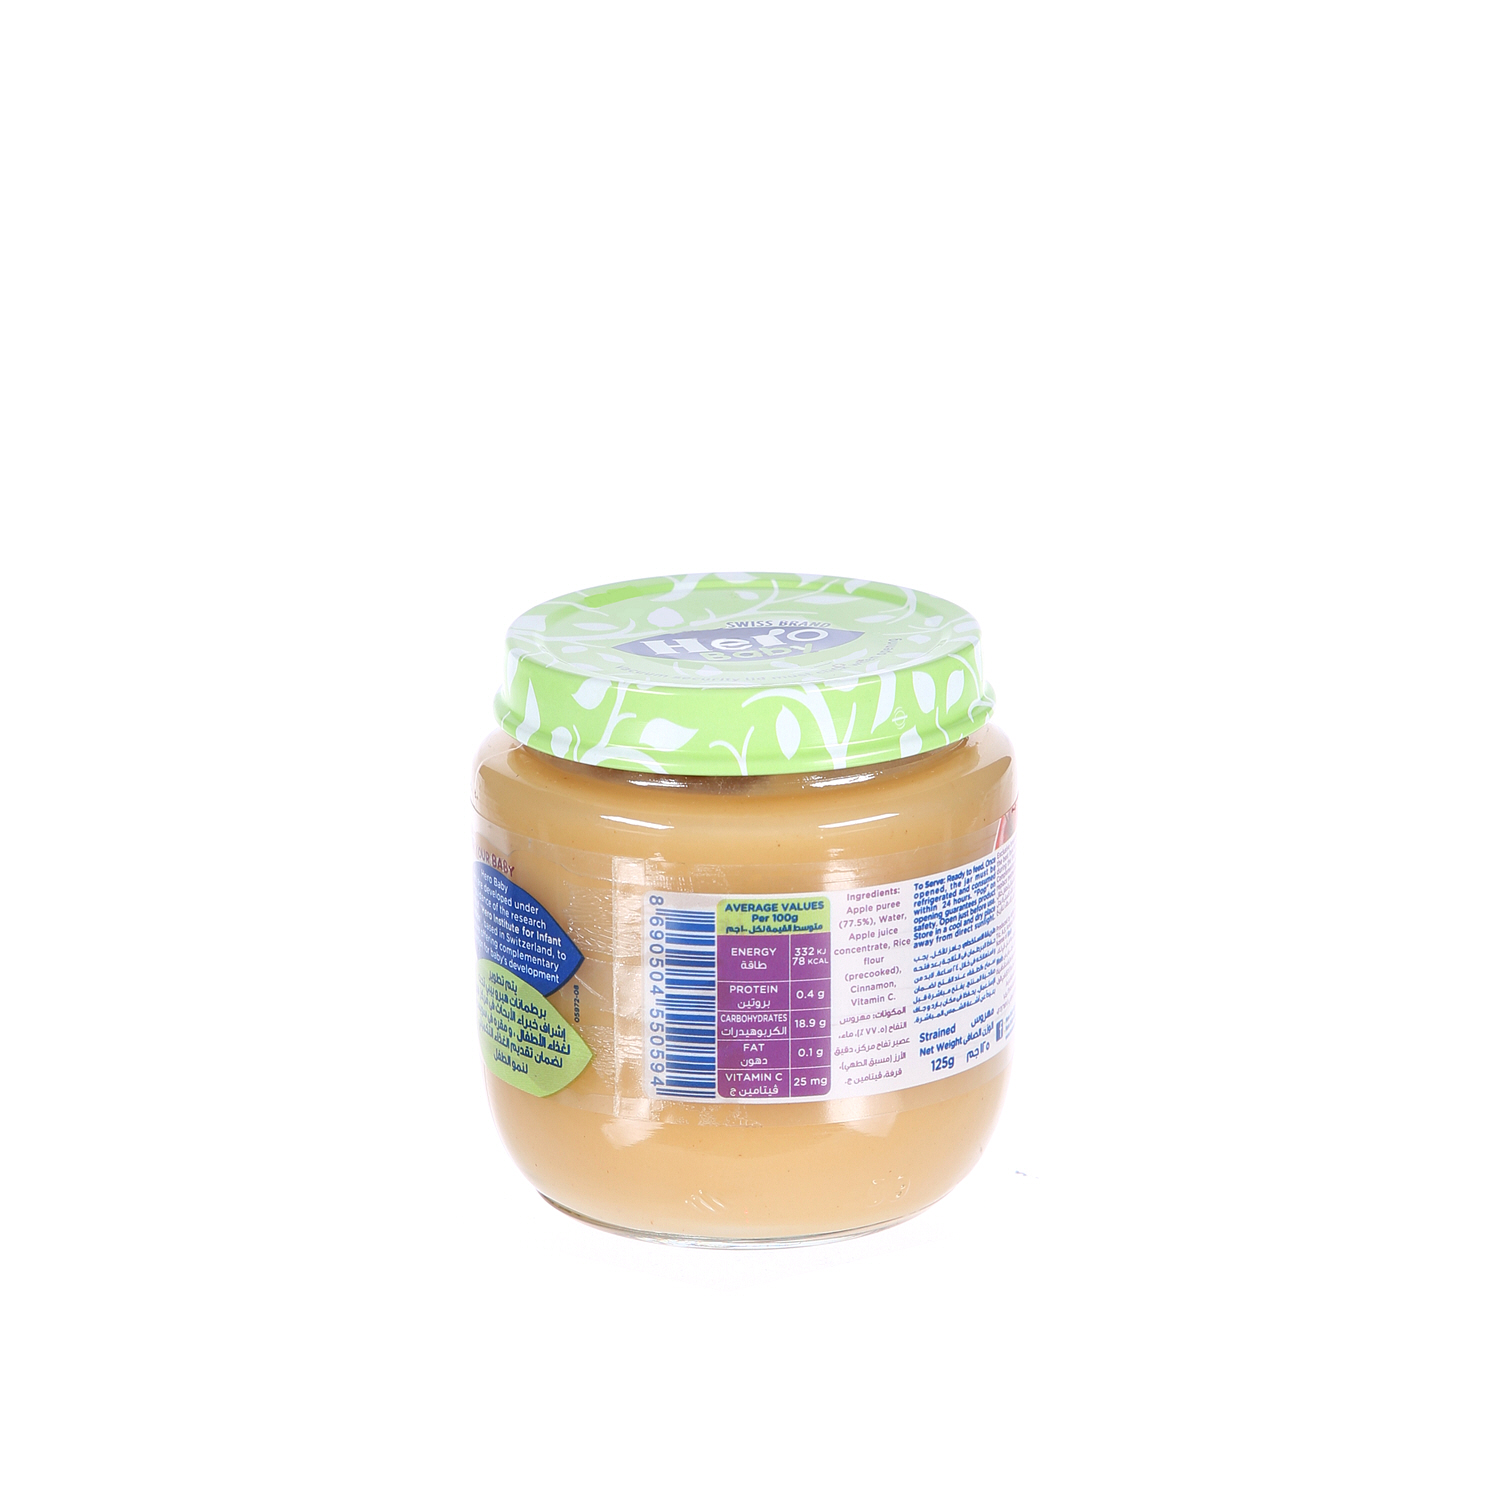 Hero Baby Apple Compote 125gm